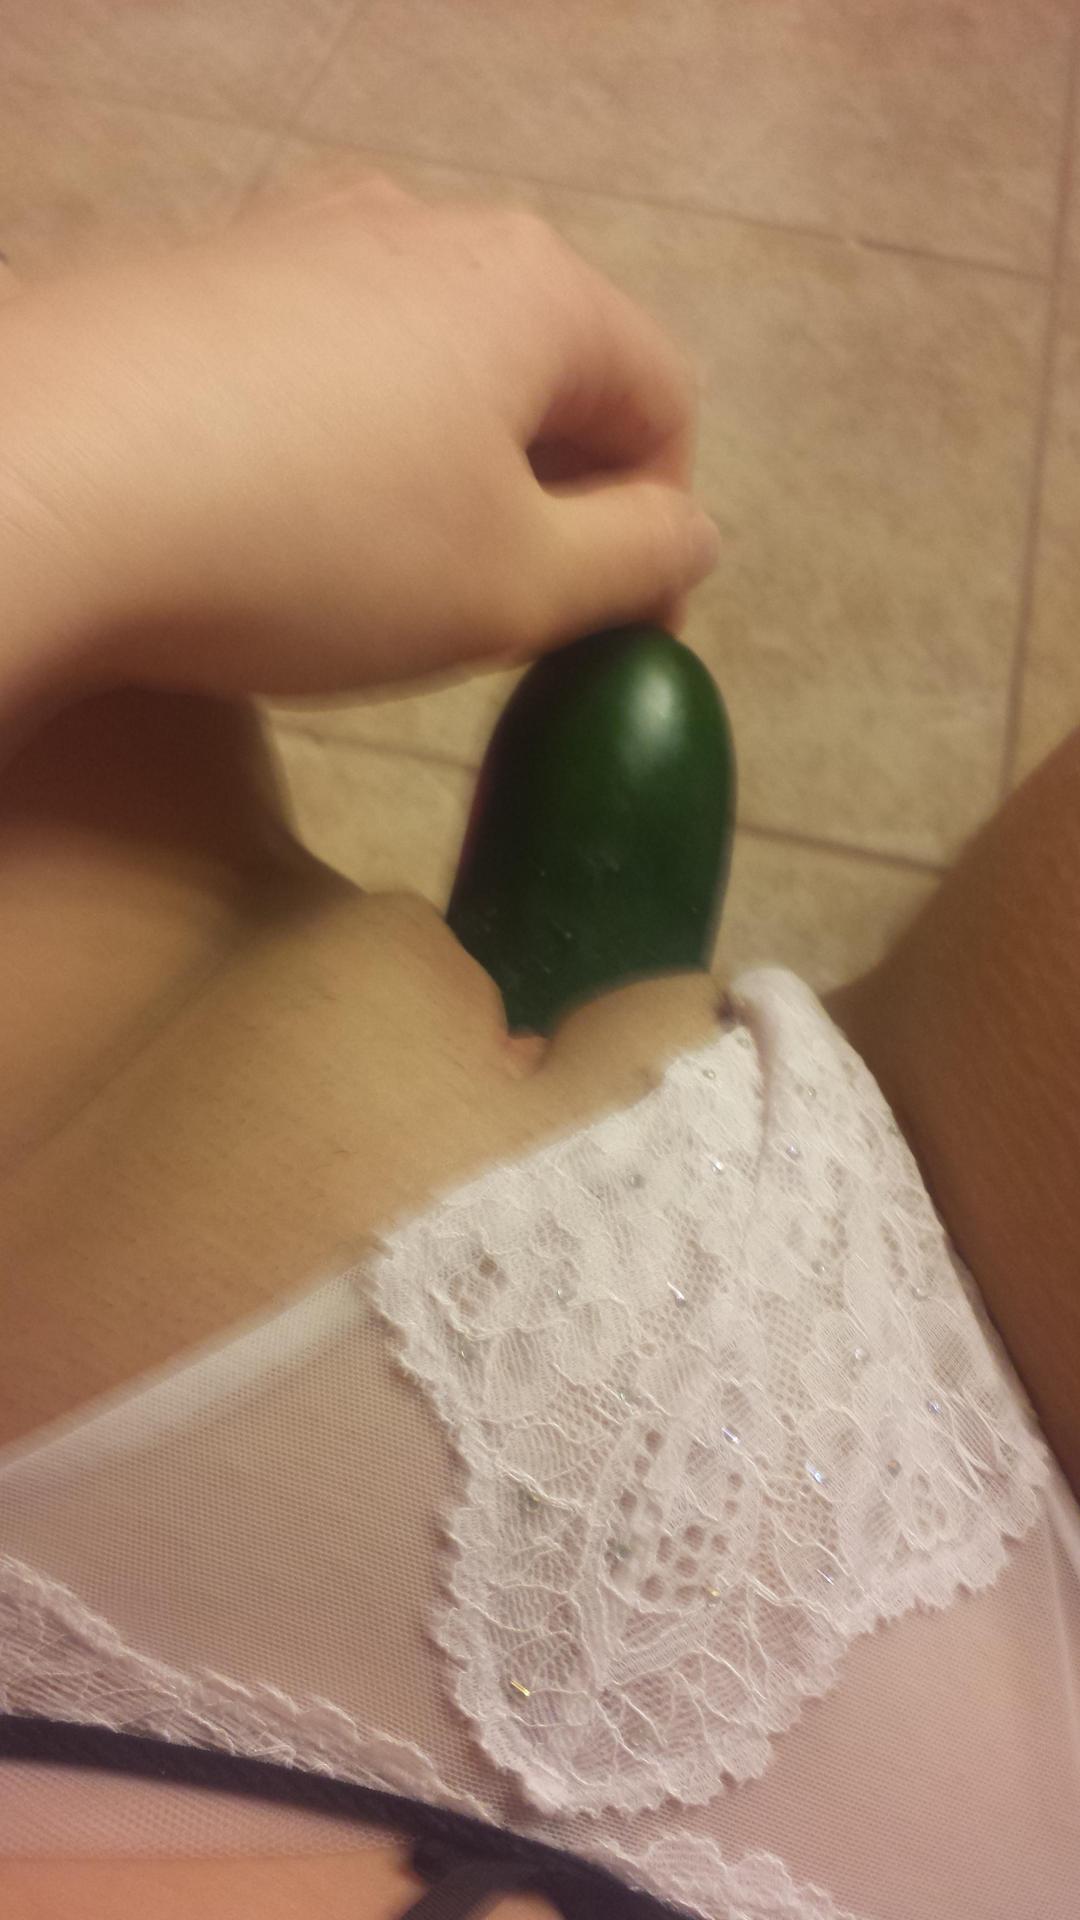 Chick doing a cucumber